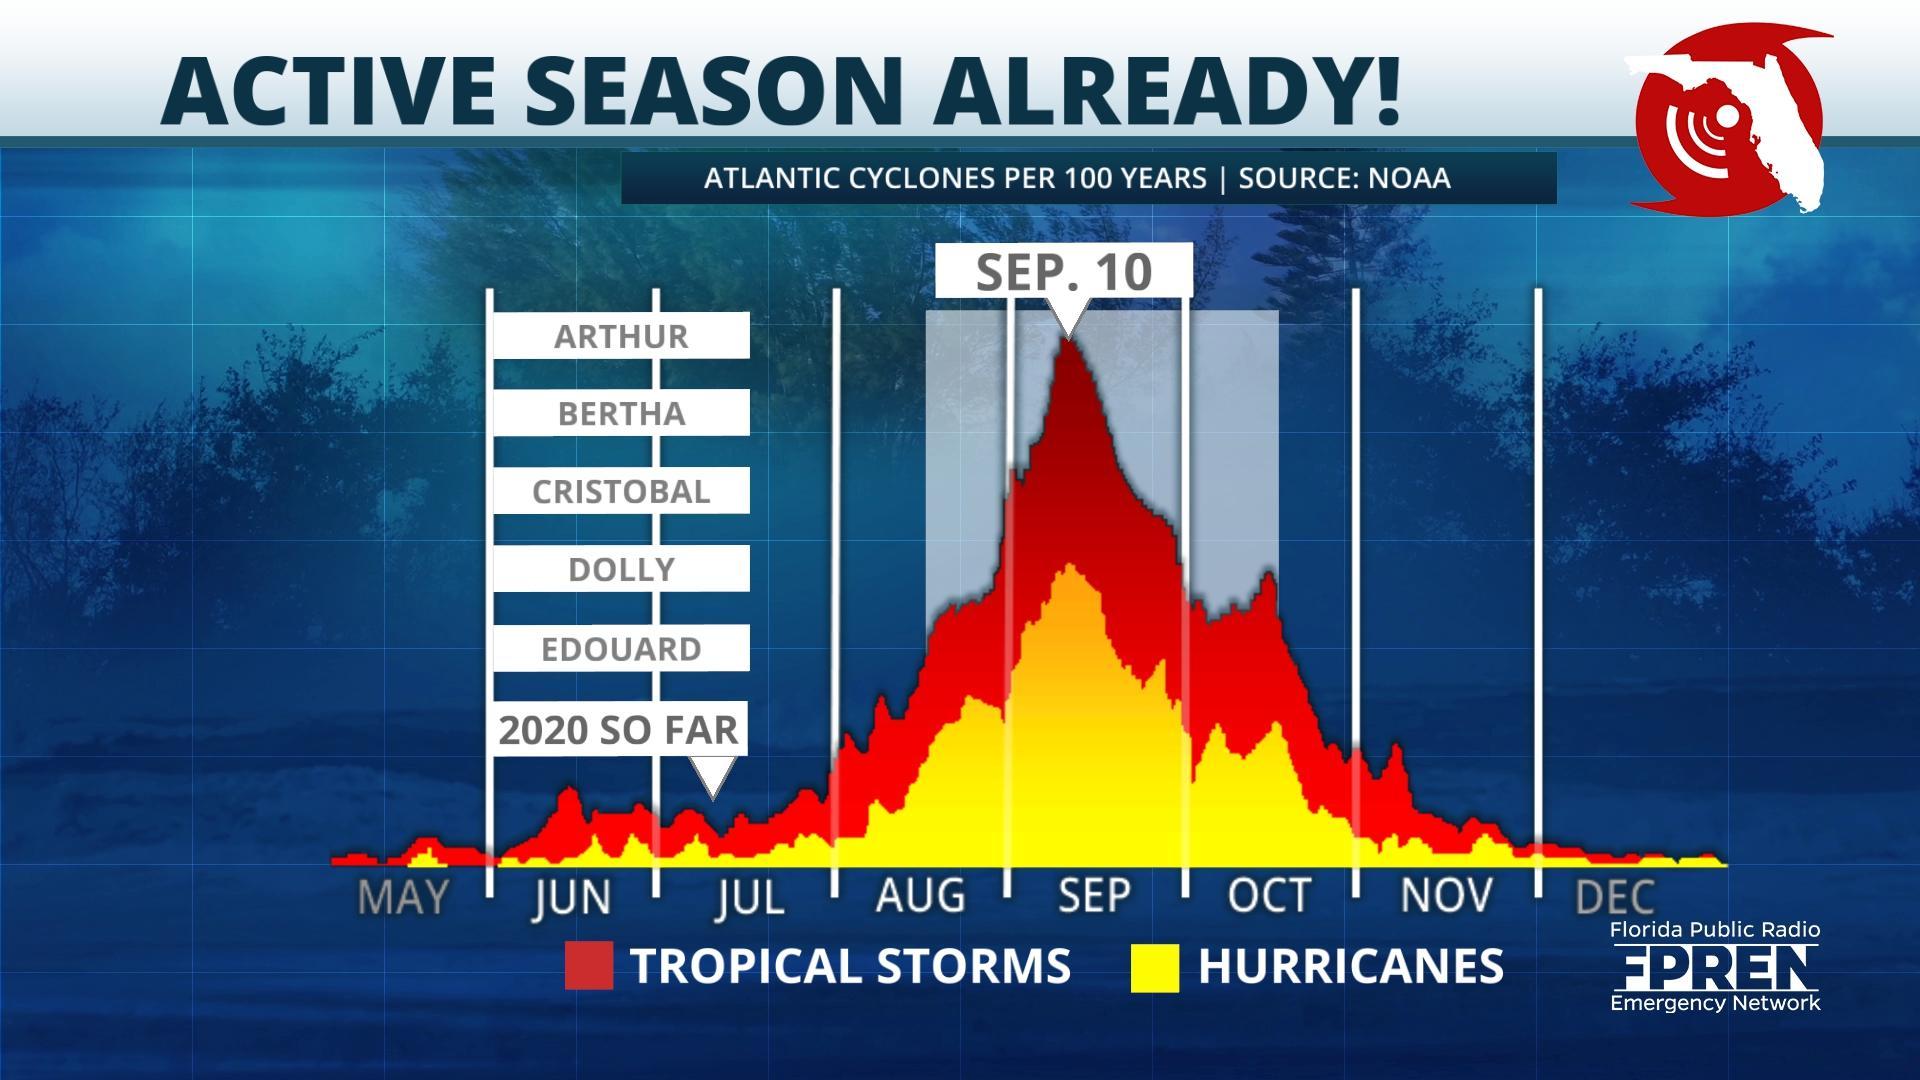 Data Continues to Suggest This Will be An Active Hurricane Season